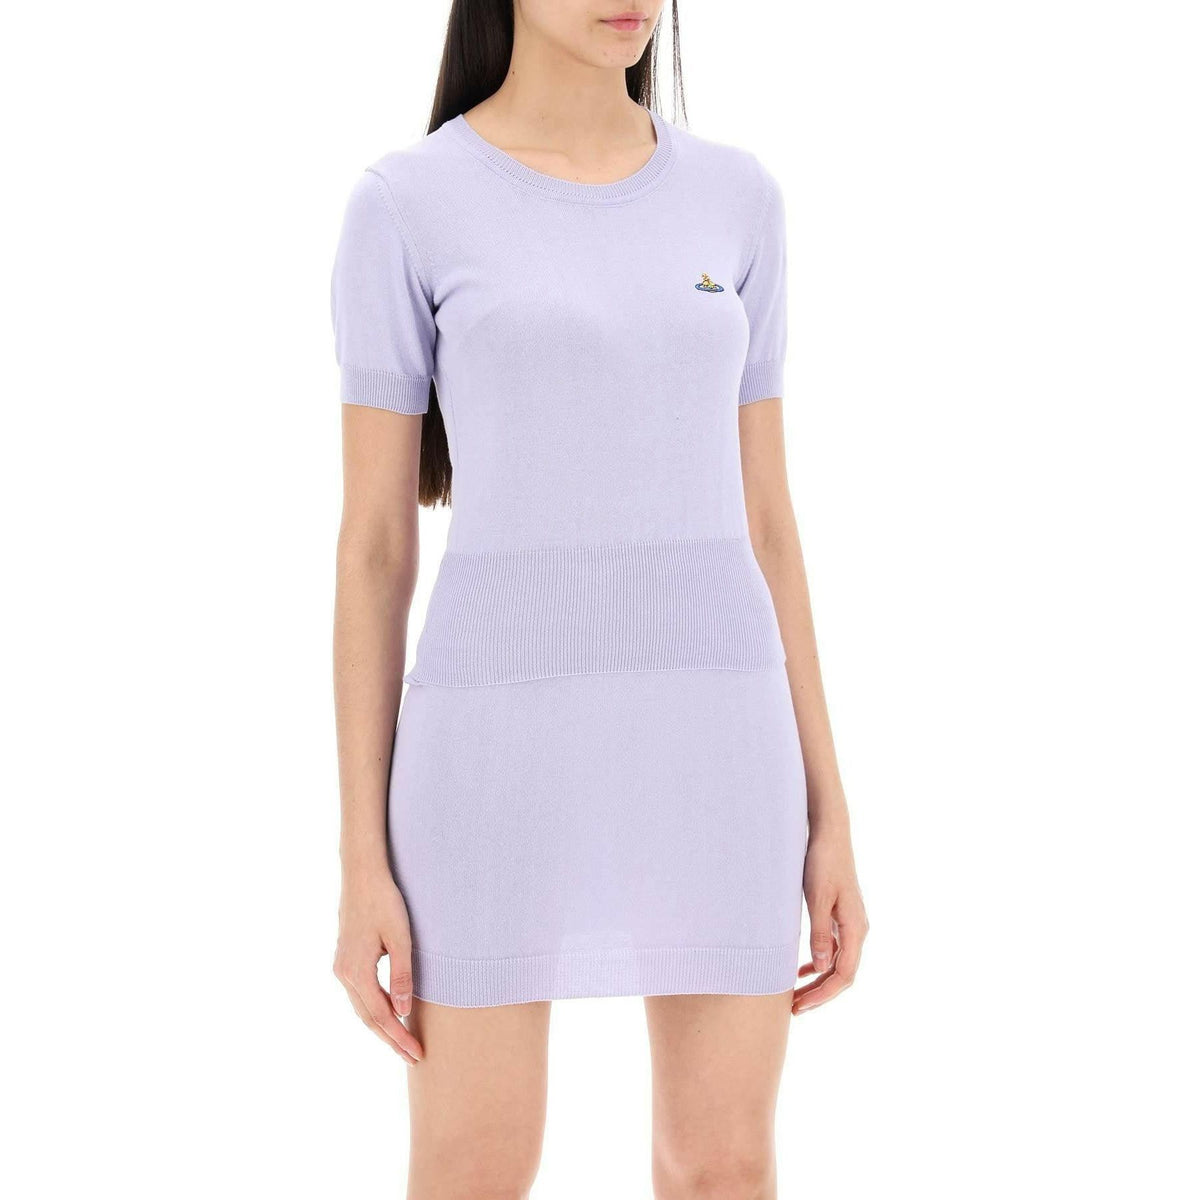 VIVIENNE WESTWOOD - Lavender Bea Short Sleeve Cotton Sweater With Orb Embroidery - JOHN JULIA